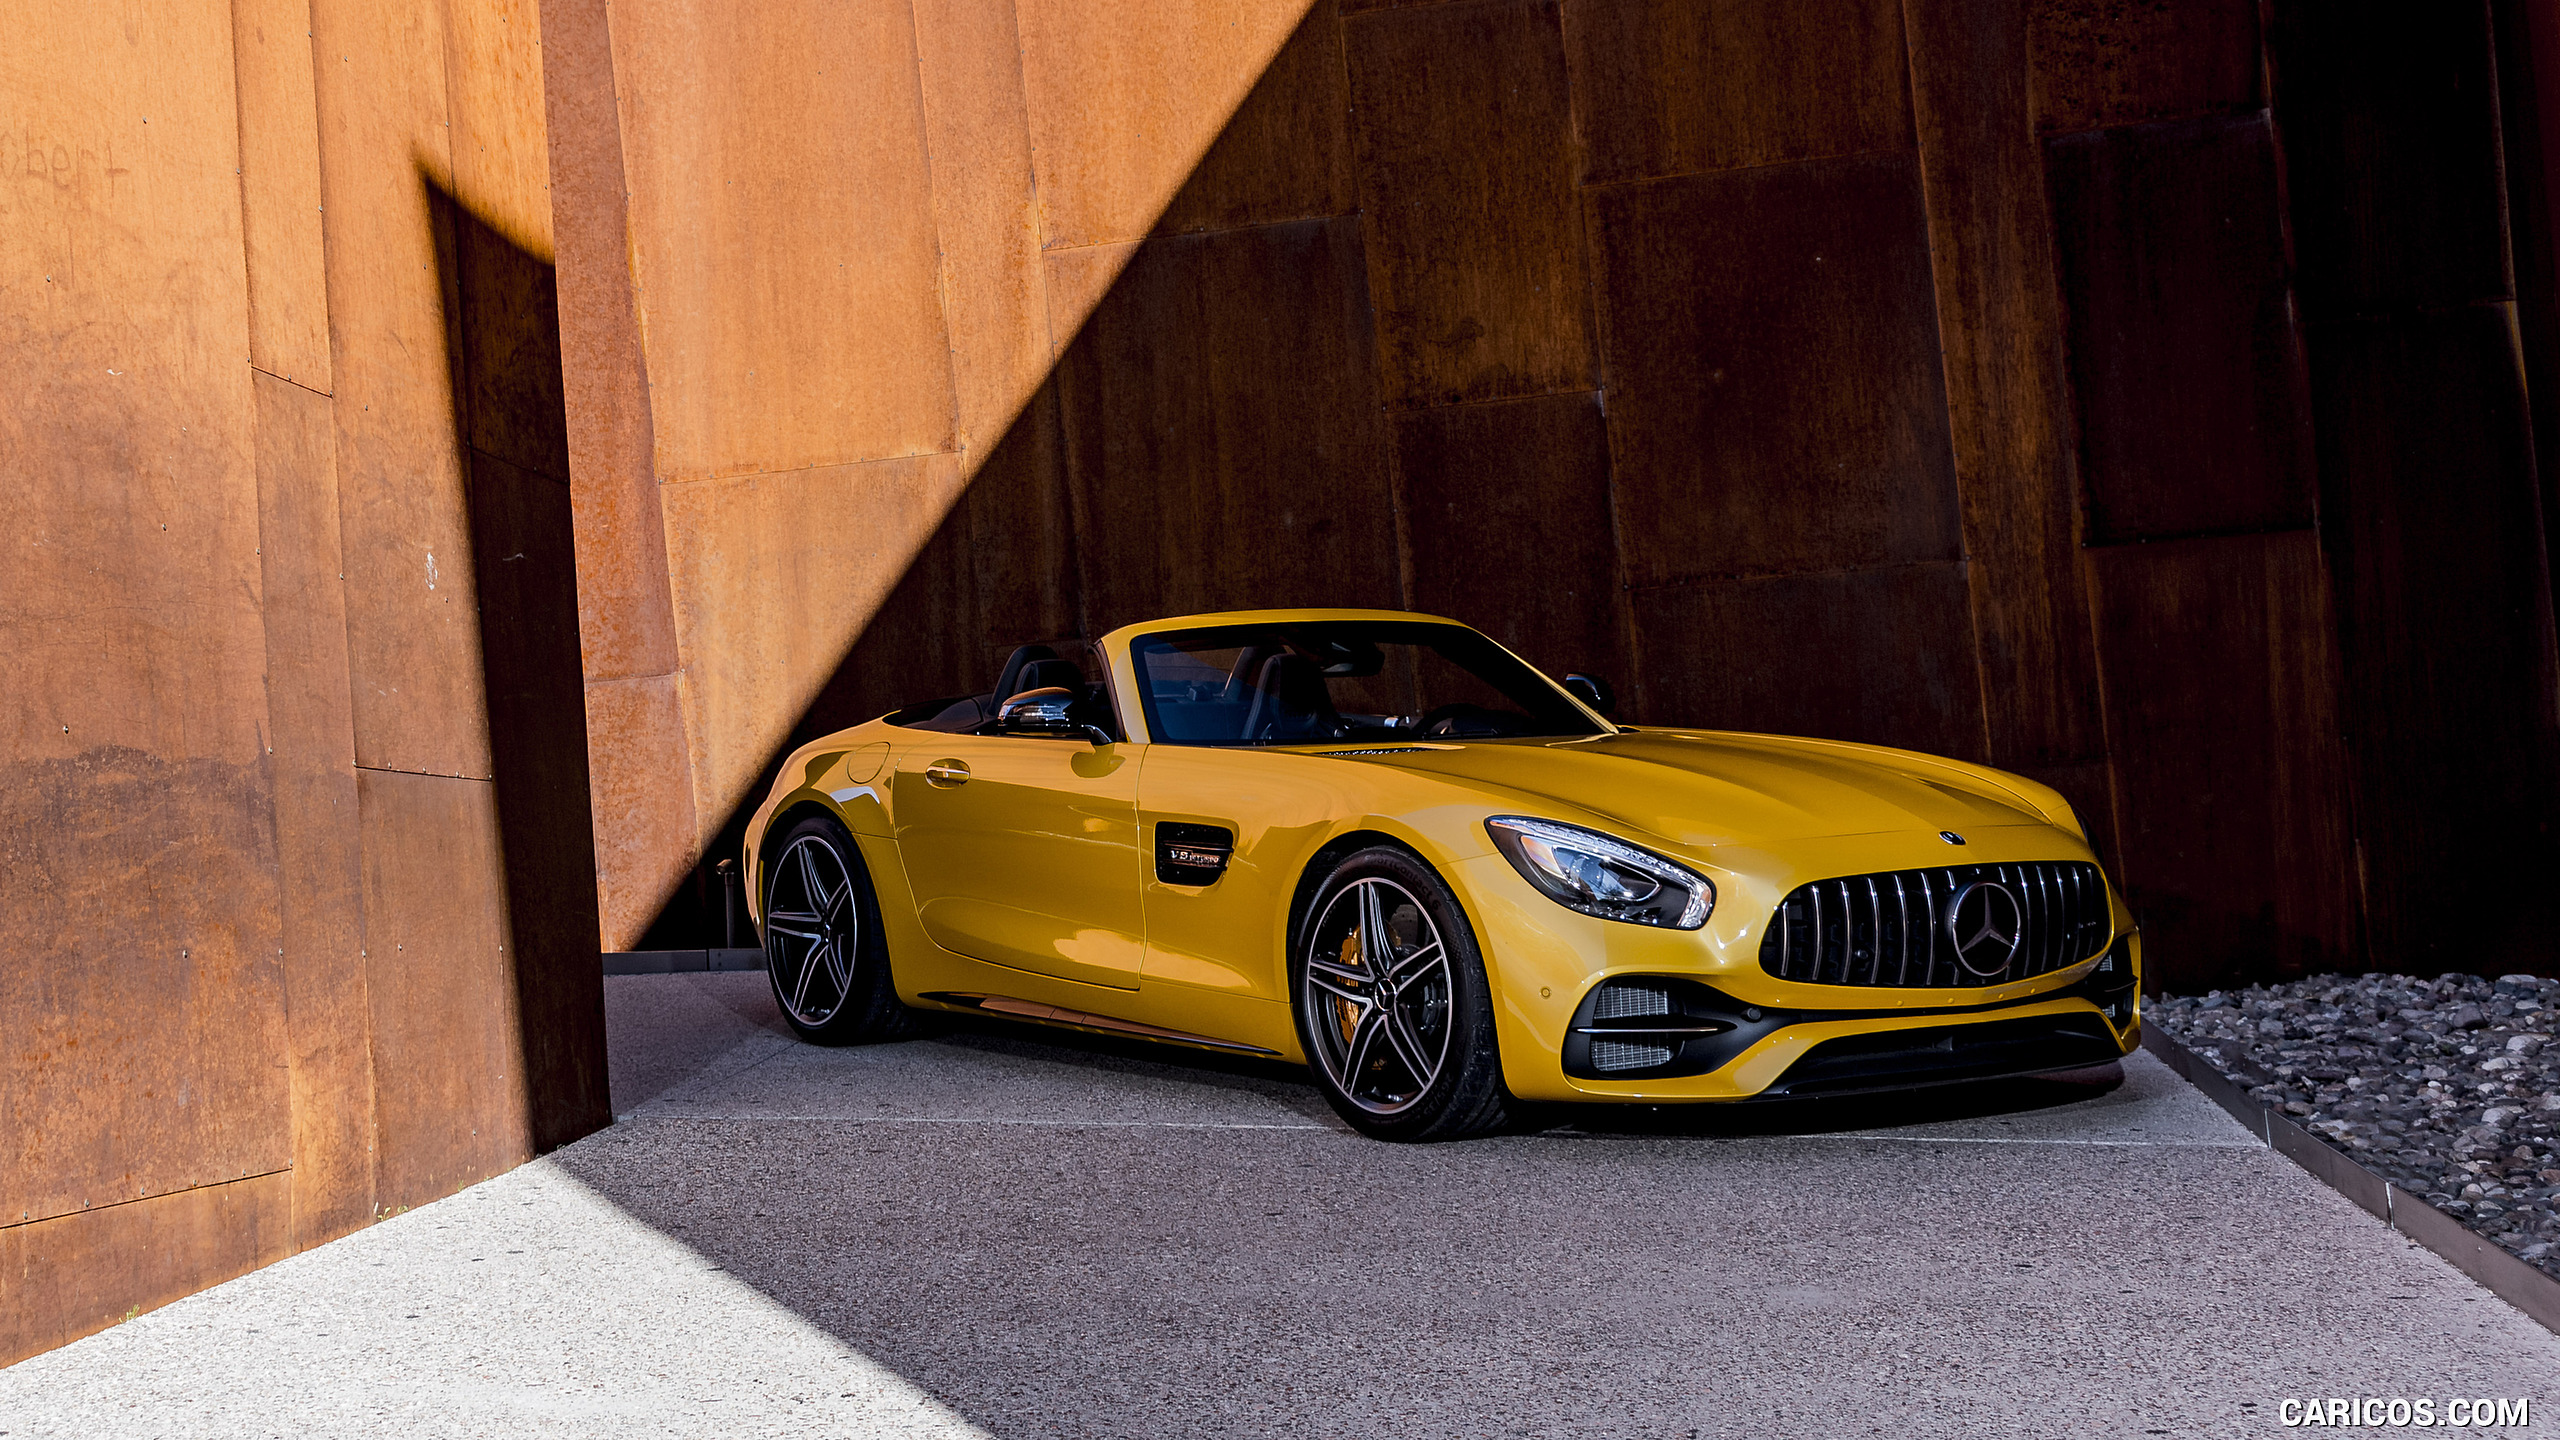 2018 Mercedes-AMG GT C Roadster - Front Three-Quarter, #242 of 350